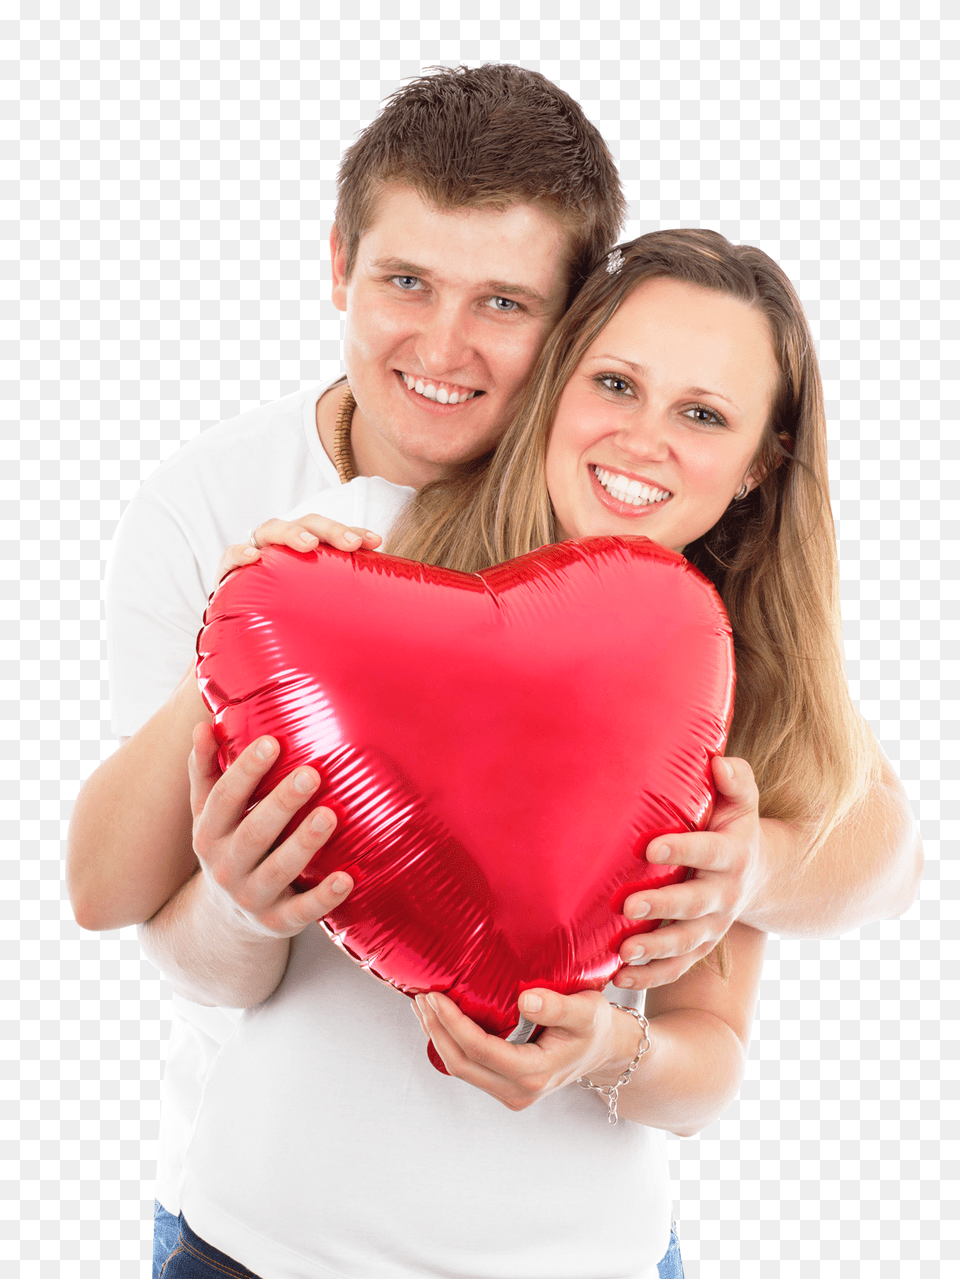 Pngpix Com Young Loving Couple Holding A Red Heart Shaped Pillow, Adult, Female, Person, Woman Free Png Download